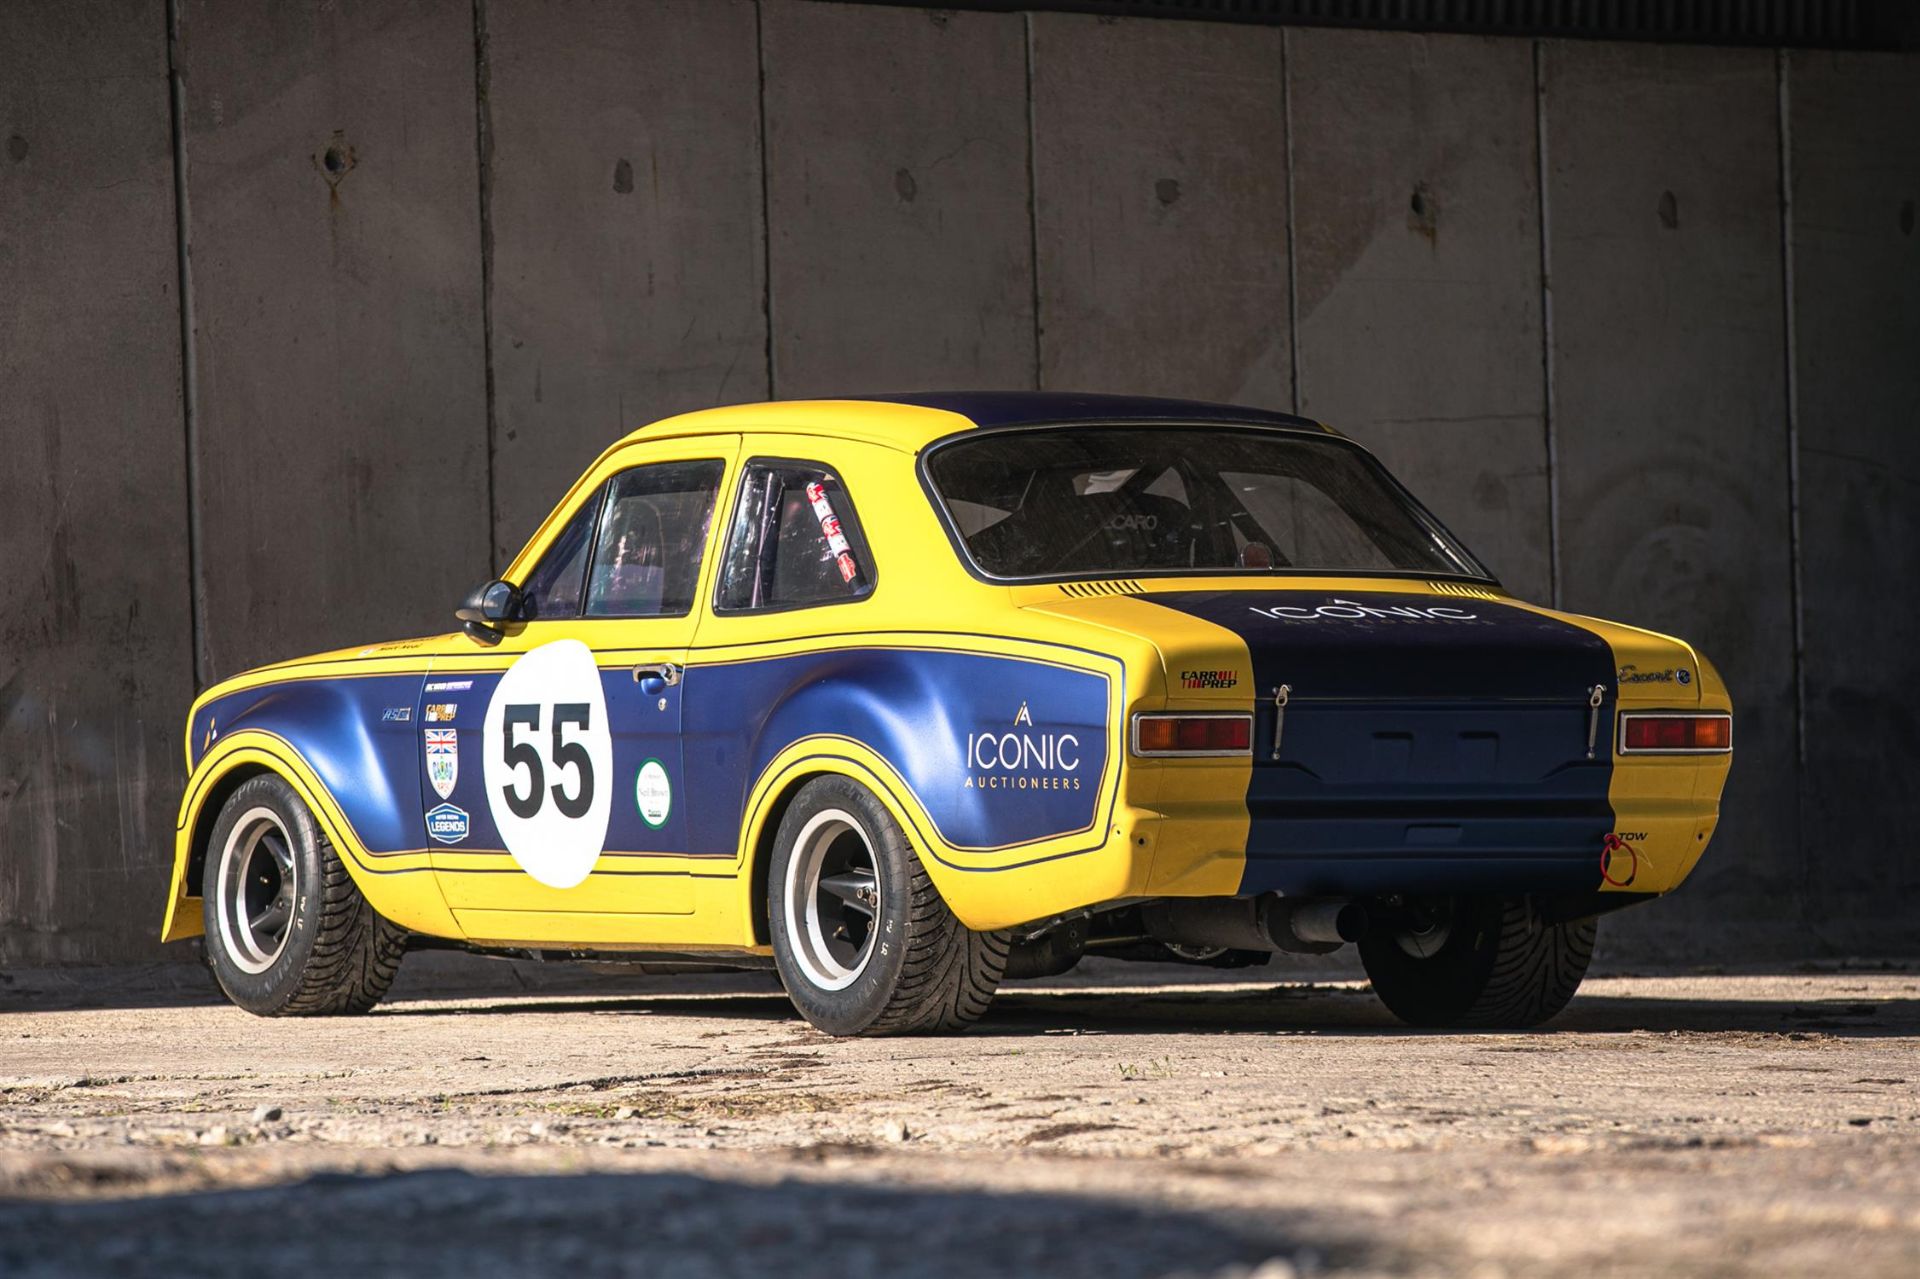 1971 JRT Ford Escort RS1600 'Group 2' FIA Race Car 'Lairy Canary'* - Image 4 of 10